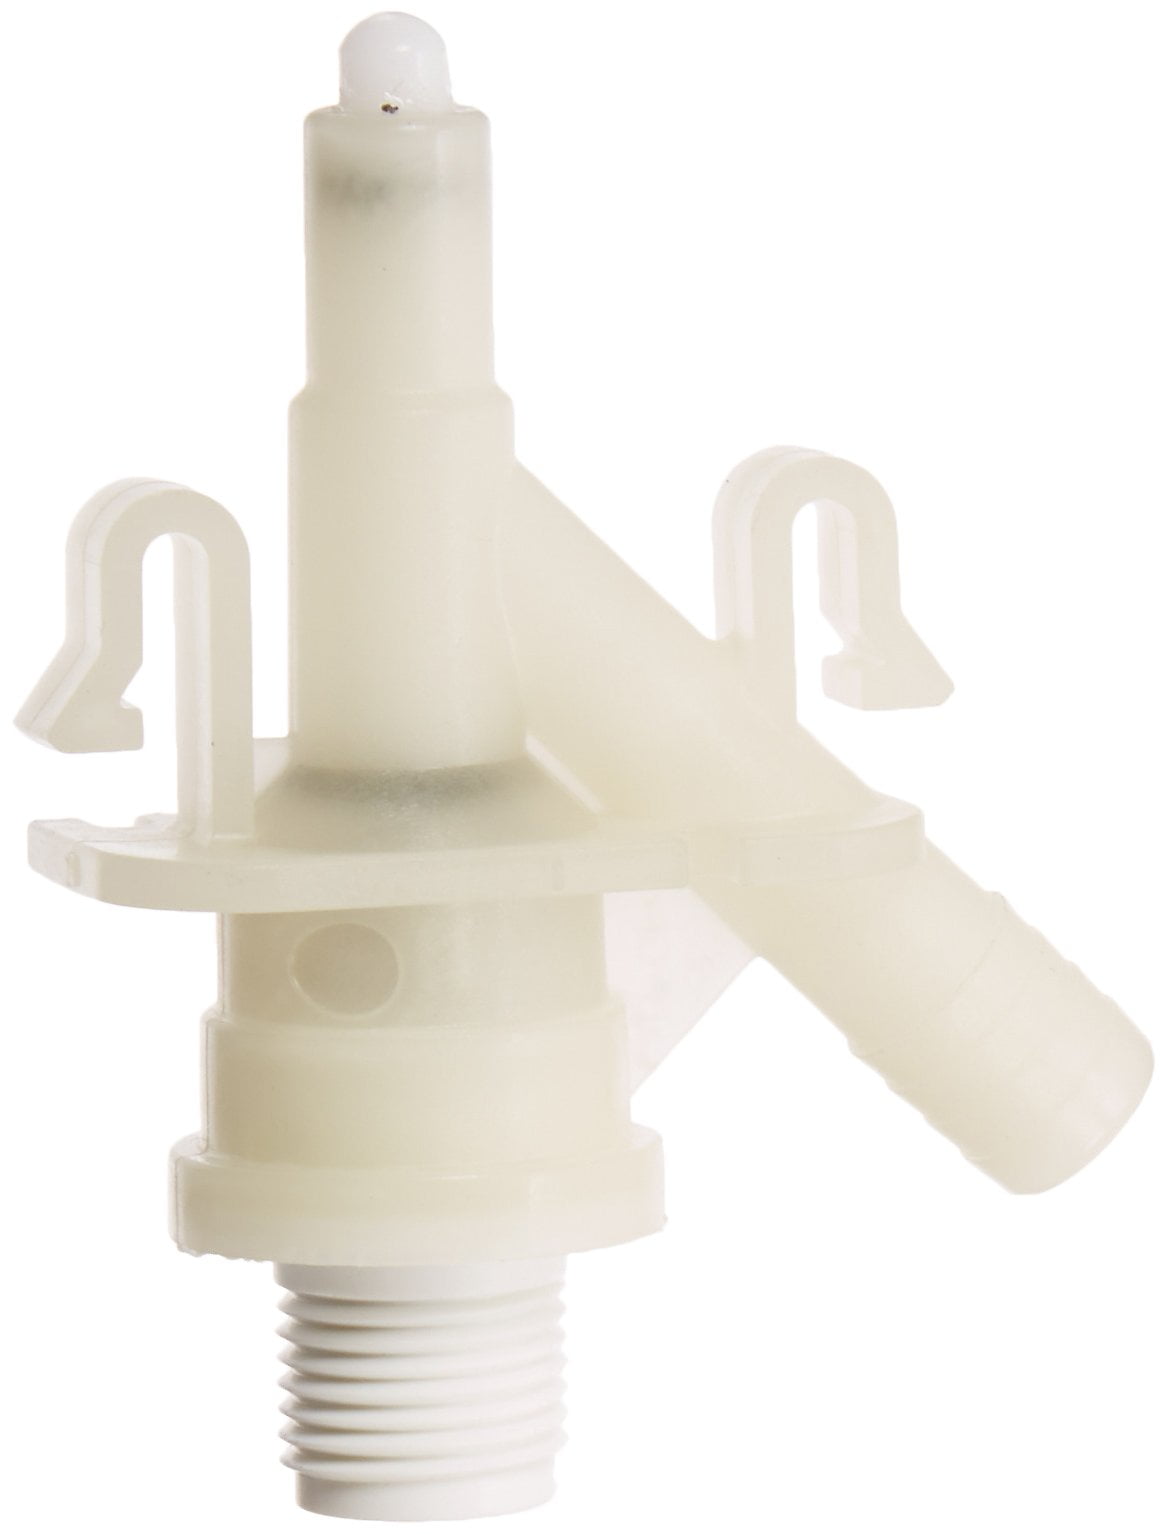 Dometic Water Valve Kit 300 385311641 - The Home Depot